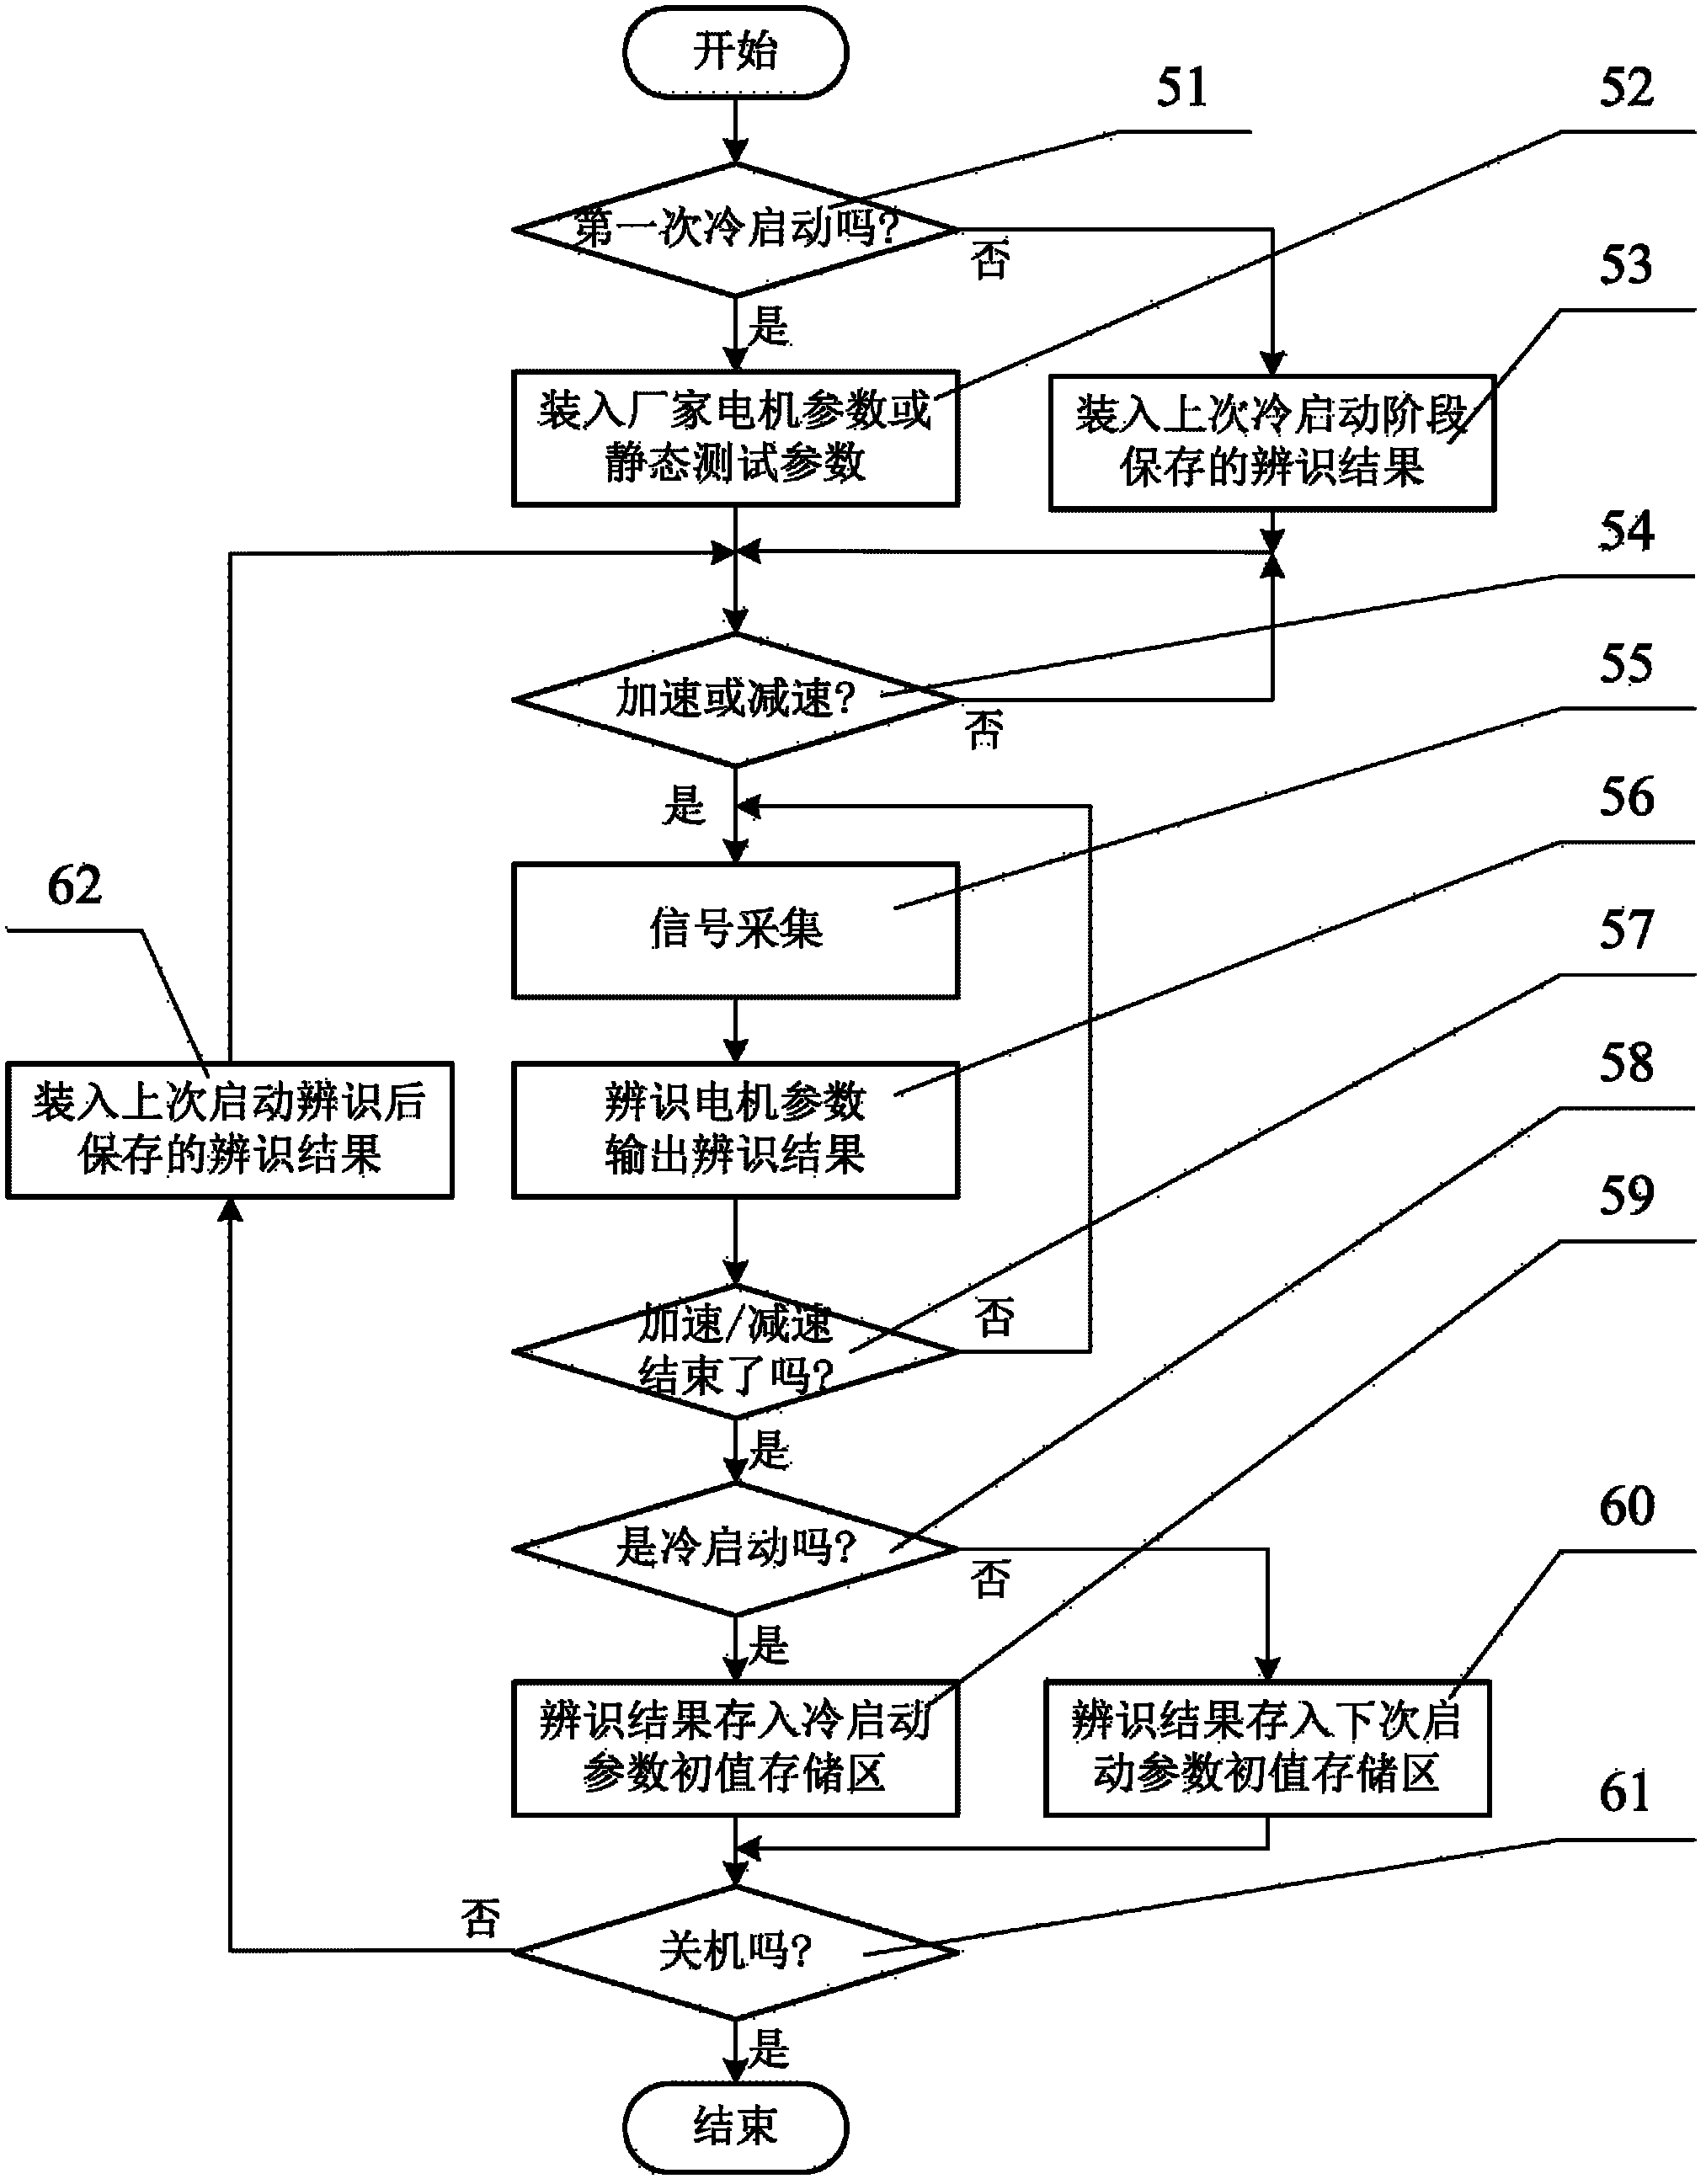 Device and method for online distinguishing parameters of servo system of permanent-magnet synchronous motor